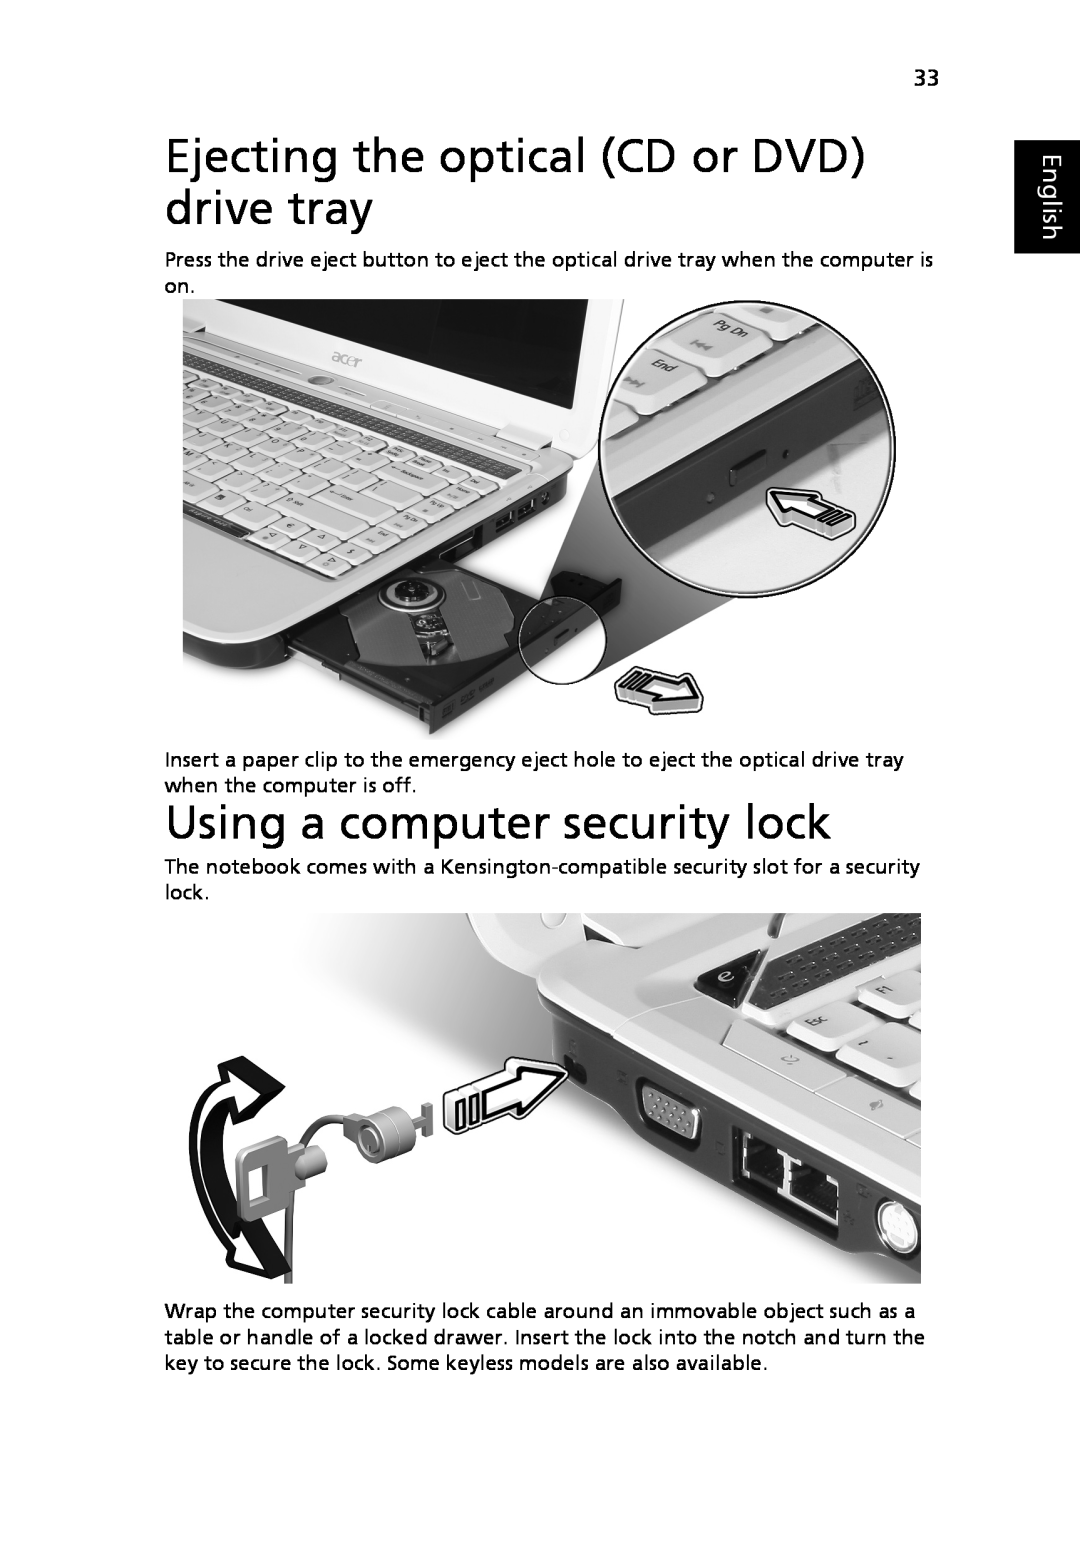 Acer MS2219, 4920 manual Ejecting the optical CD or DVD drive tray, Using a computer security lock, English 